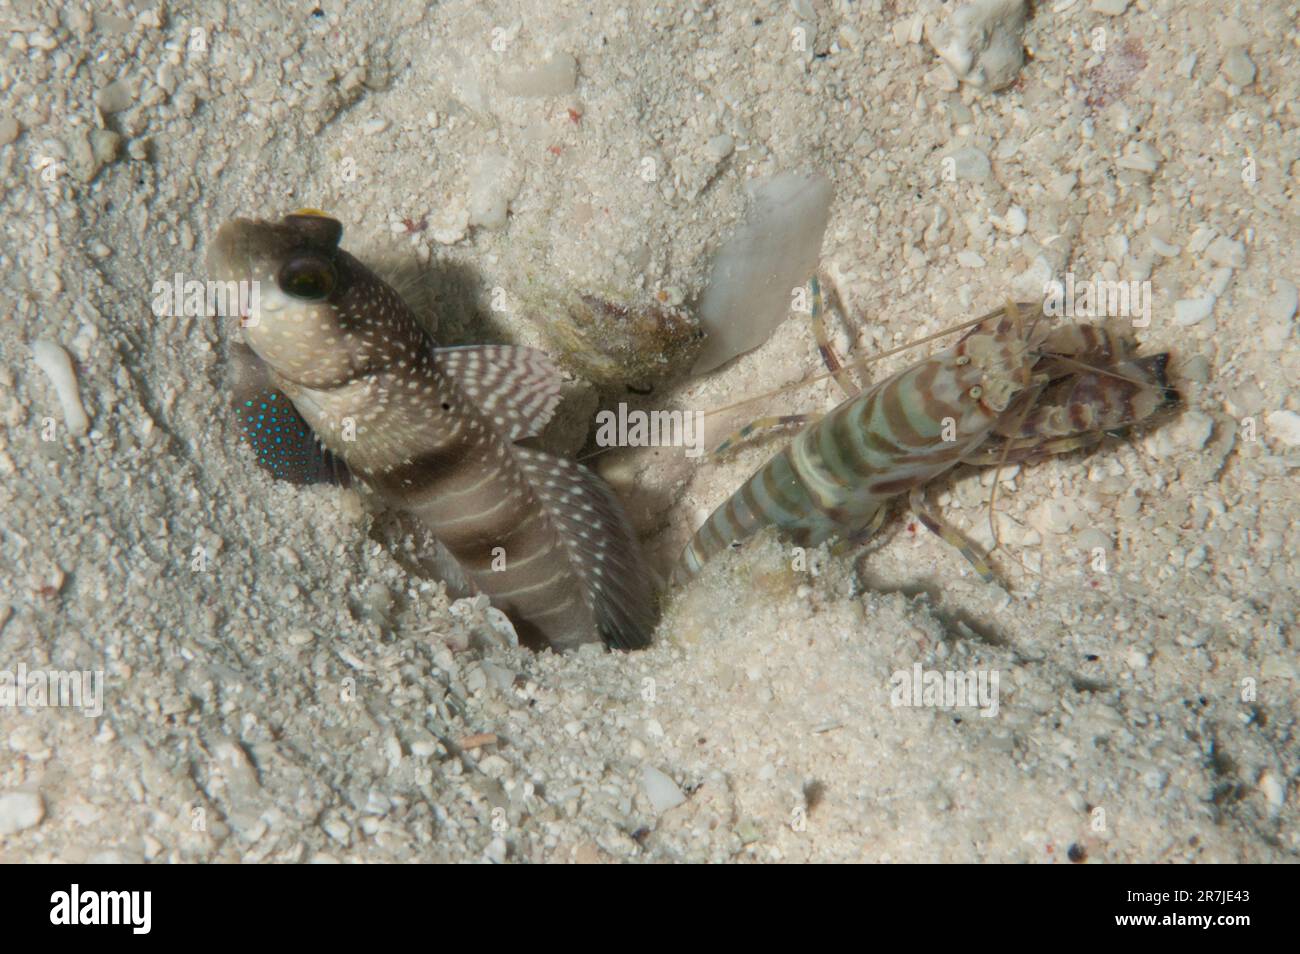 Banded Shrimpgoby, Cryptocentrus cinctus, with Djibouti Snapping Shrimp, Alpheus djiboutensis, by hole, Raja Ampat, West Papua, Indonesia Stock Photo